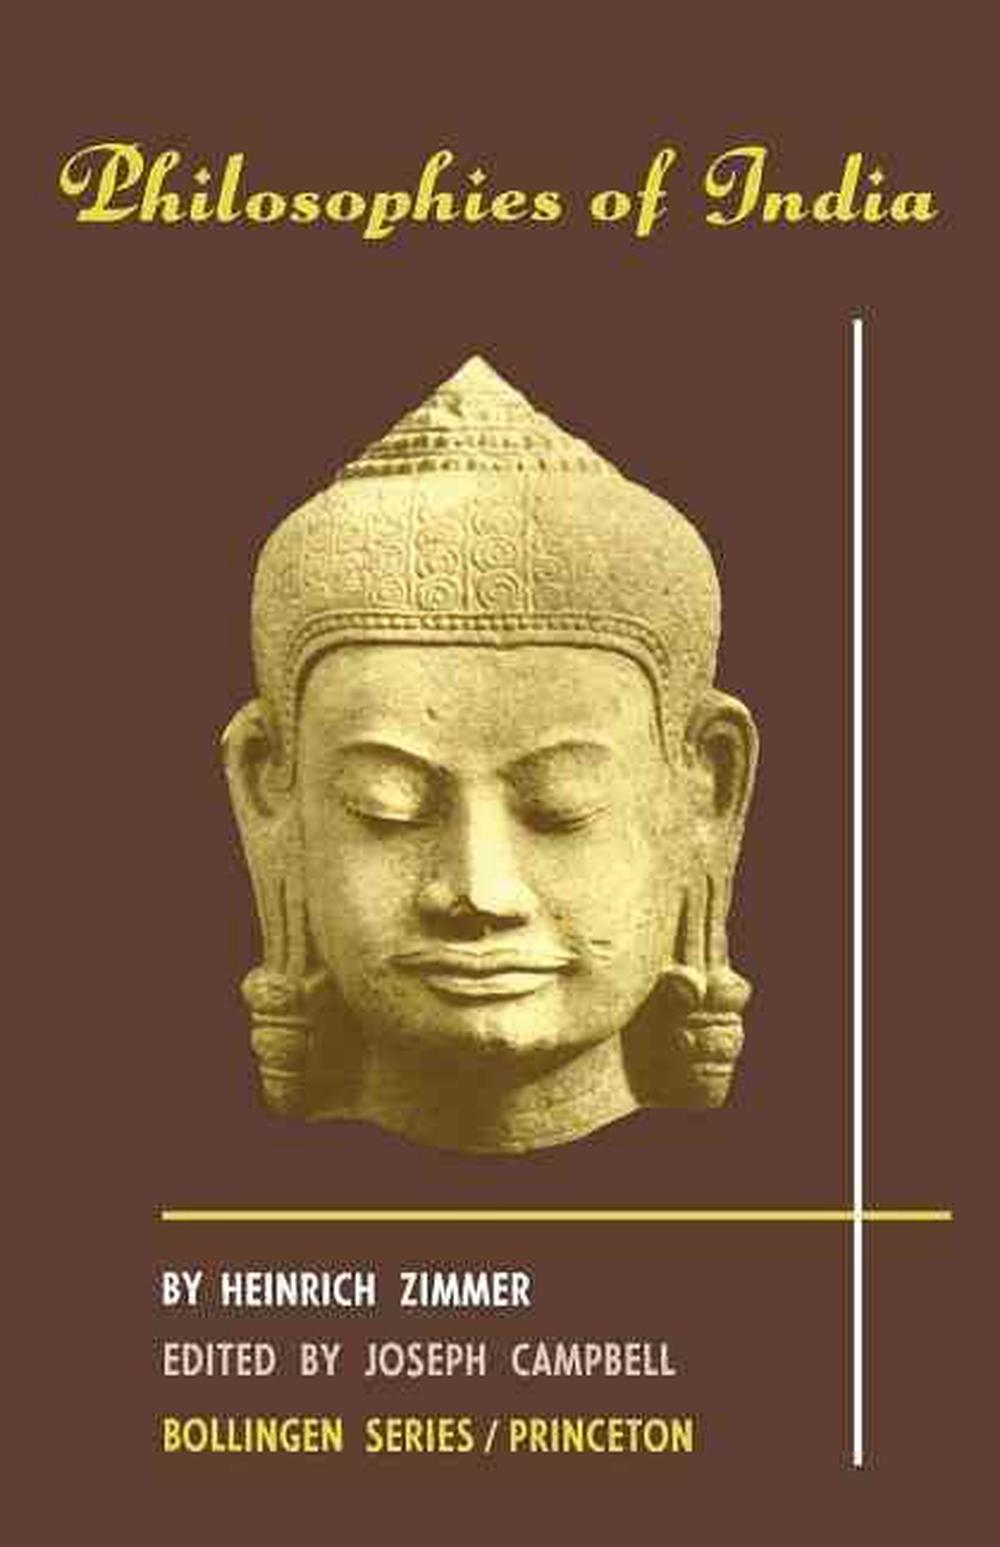 Philosophies of India by Heinrich Zimmer (English) Paperback Book Free ...